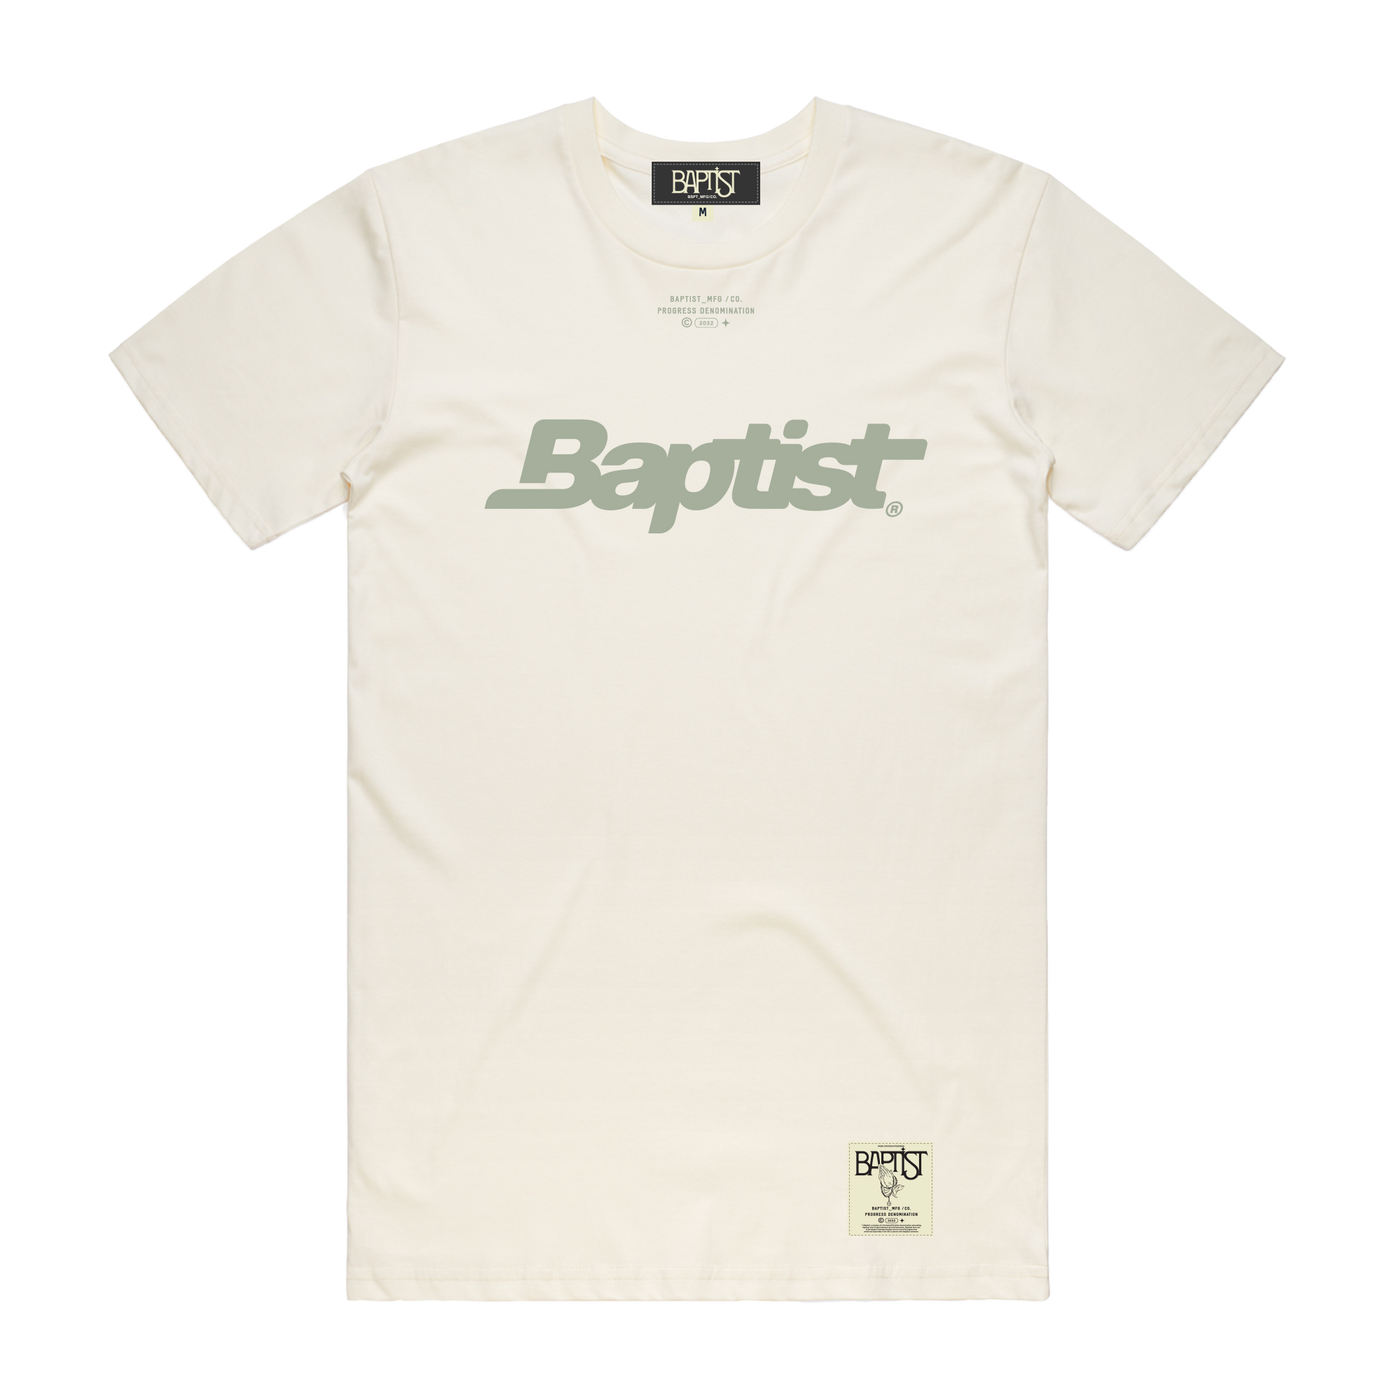 The Baptist Logo S/S Tee - Natural